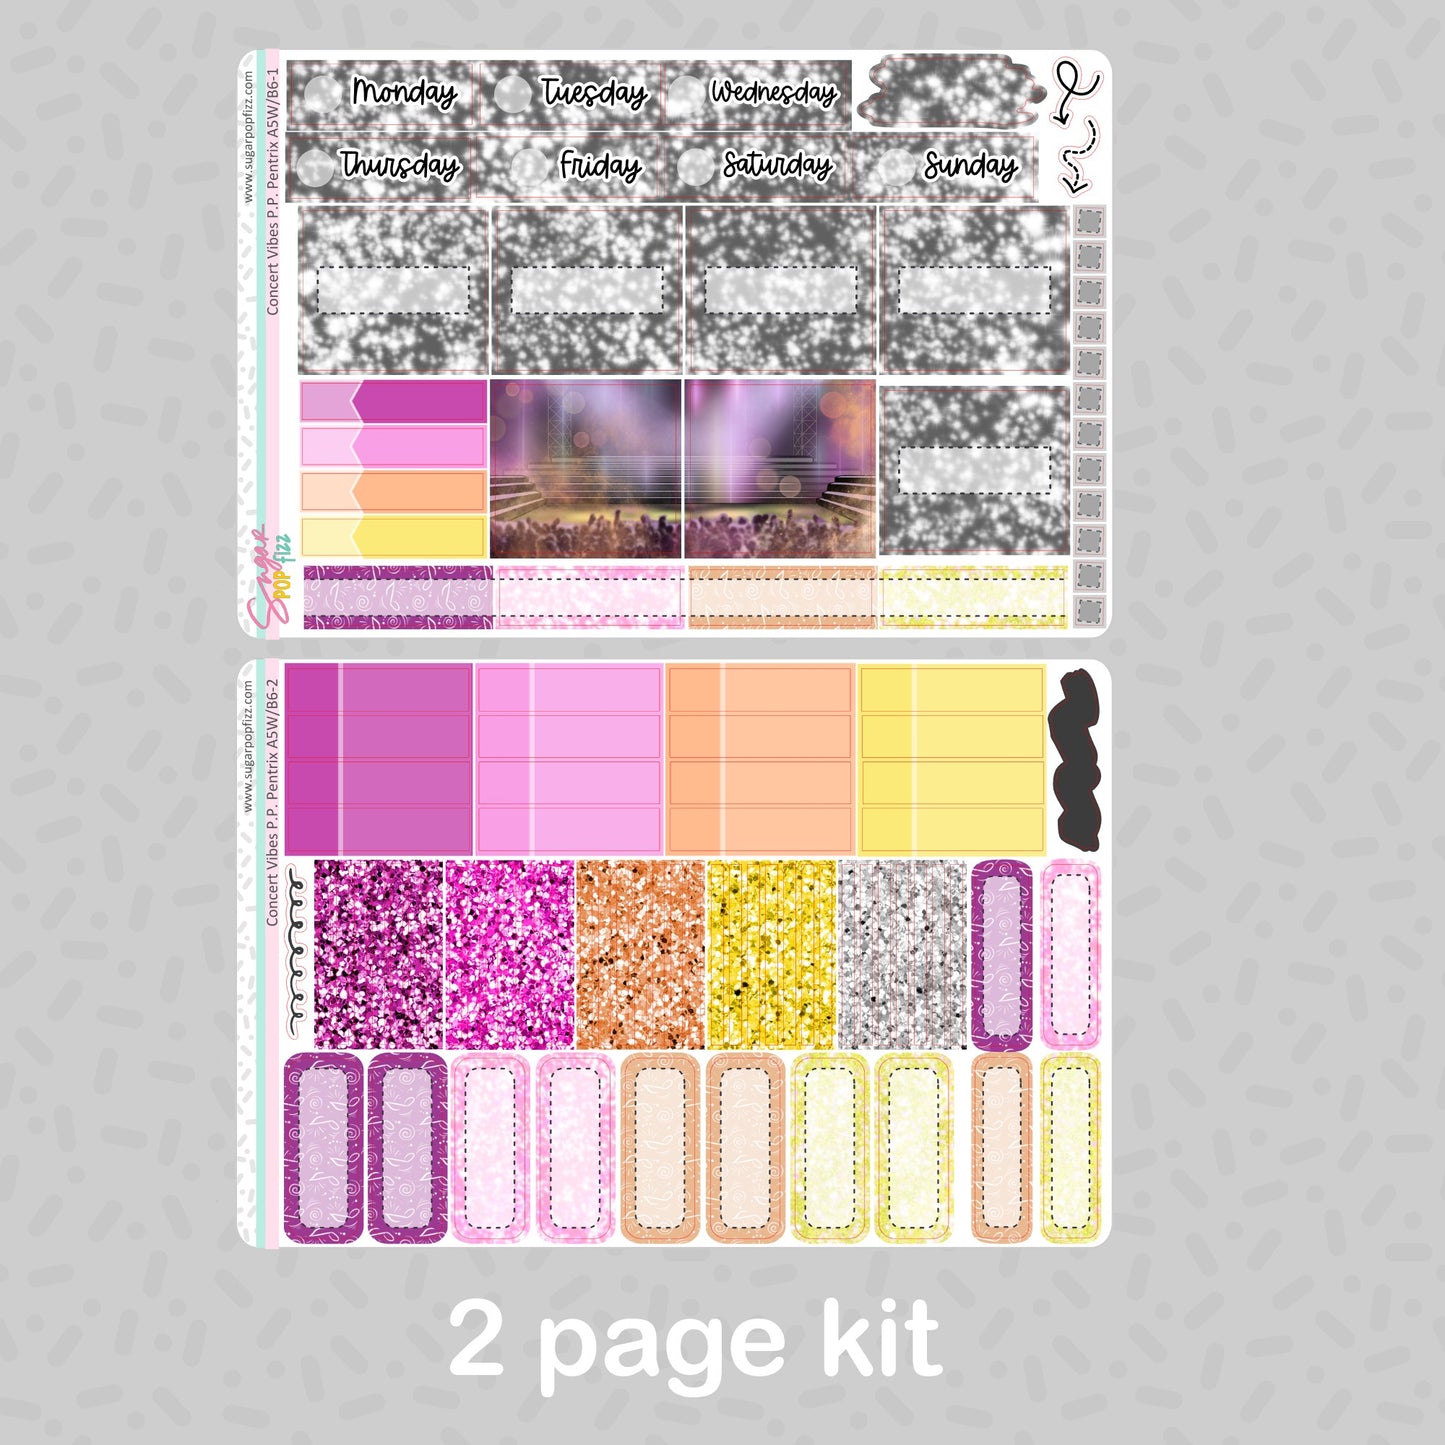 Concert Vibes Penny Pages Pentrix Weekly Kit